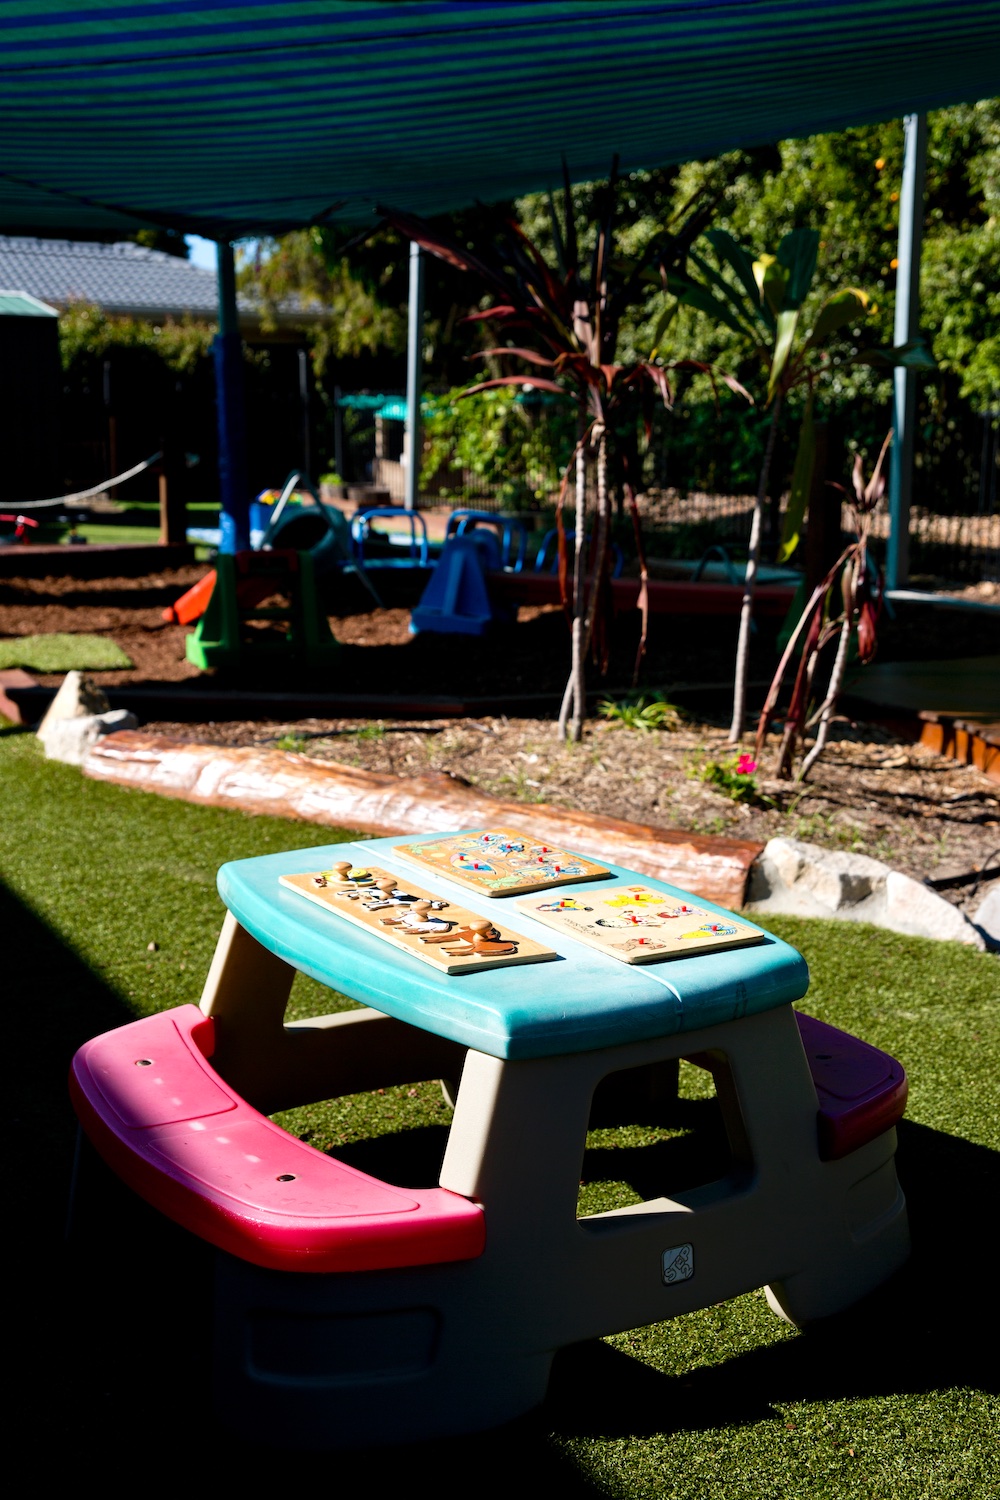 Goodstart Early Learning Redcliffe - Williams Street | 33 Williams St, Redcliffe QLD 4020, Australia | Phone: 1800 222 543